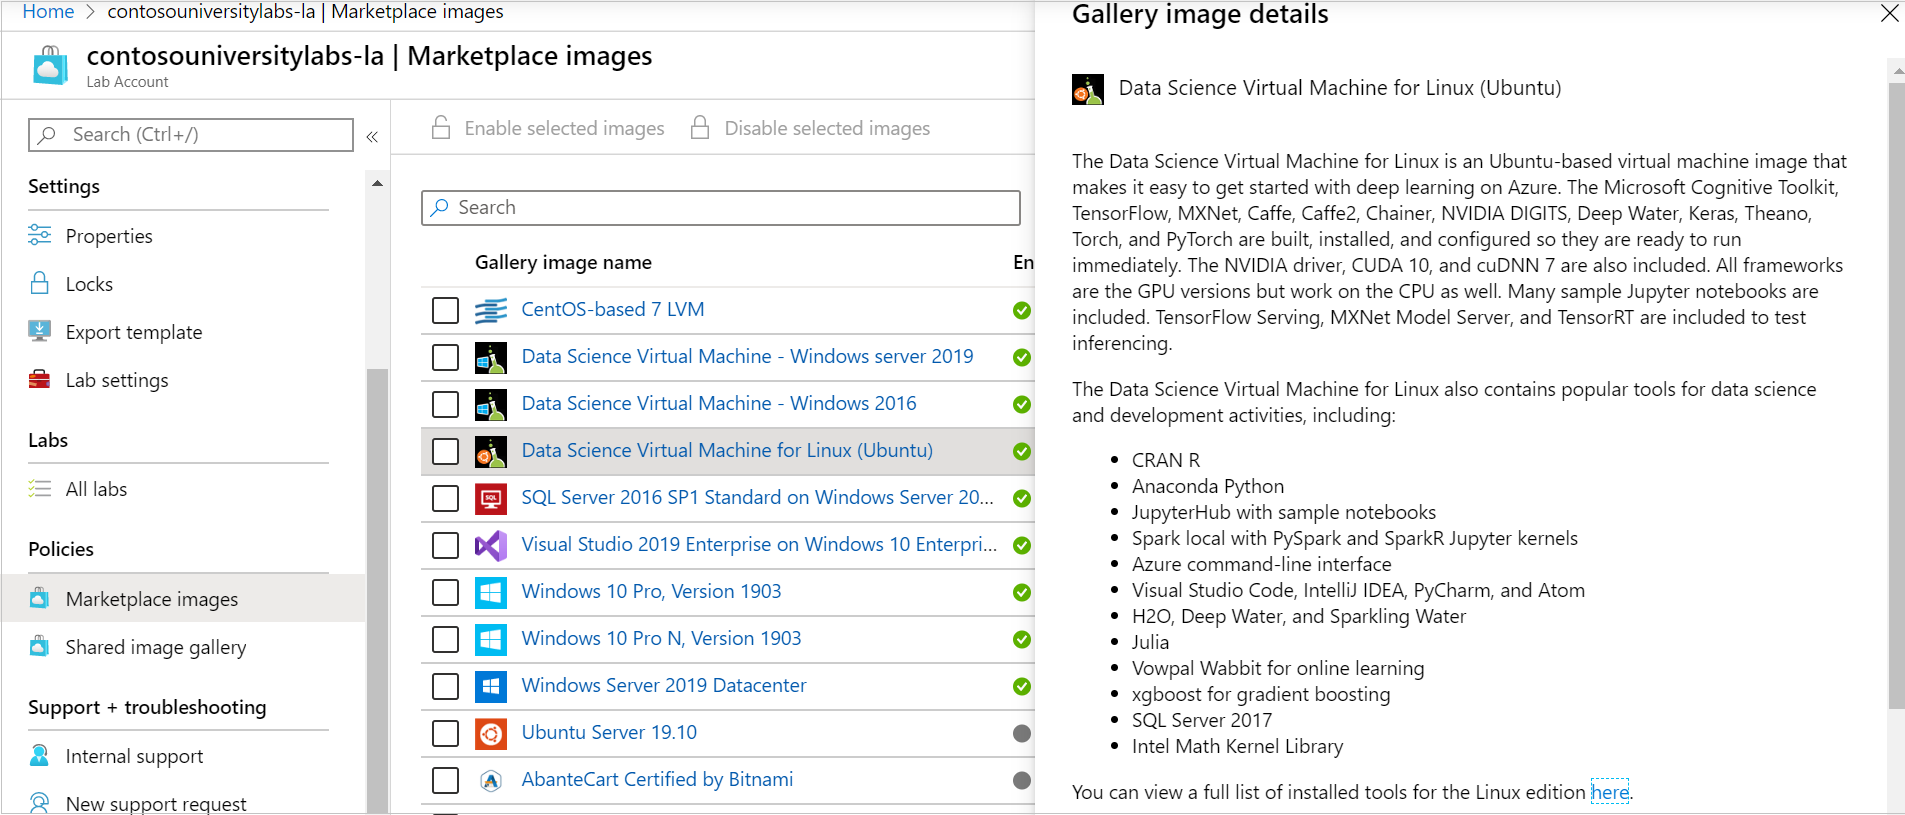 Screenshot of a list of images available for review in Azure Marketplace.